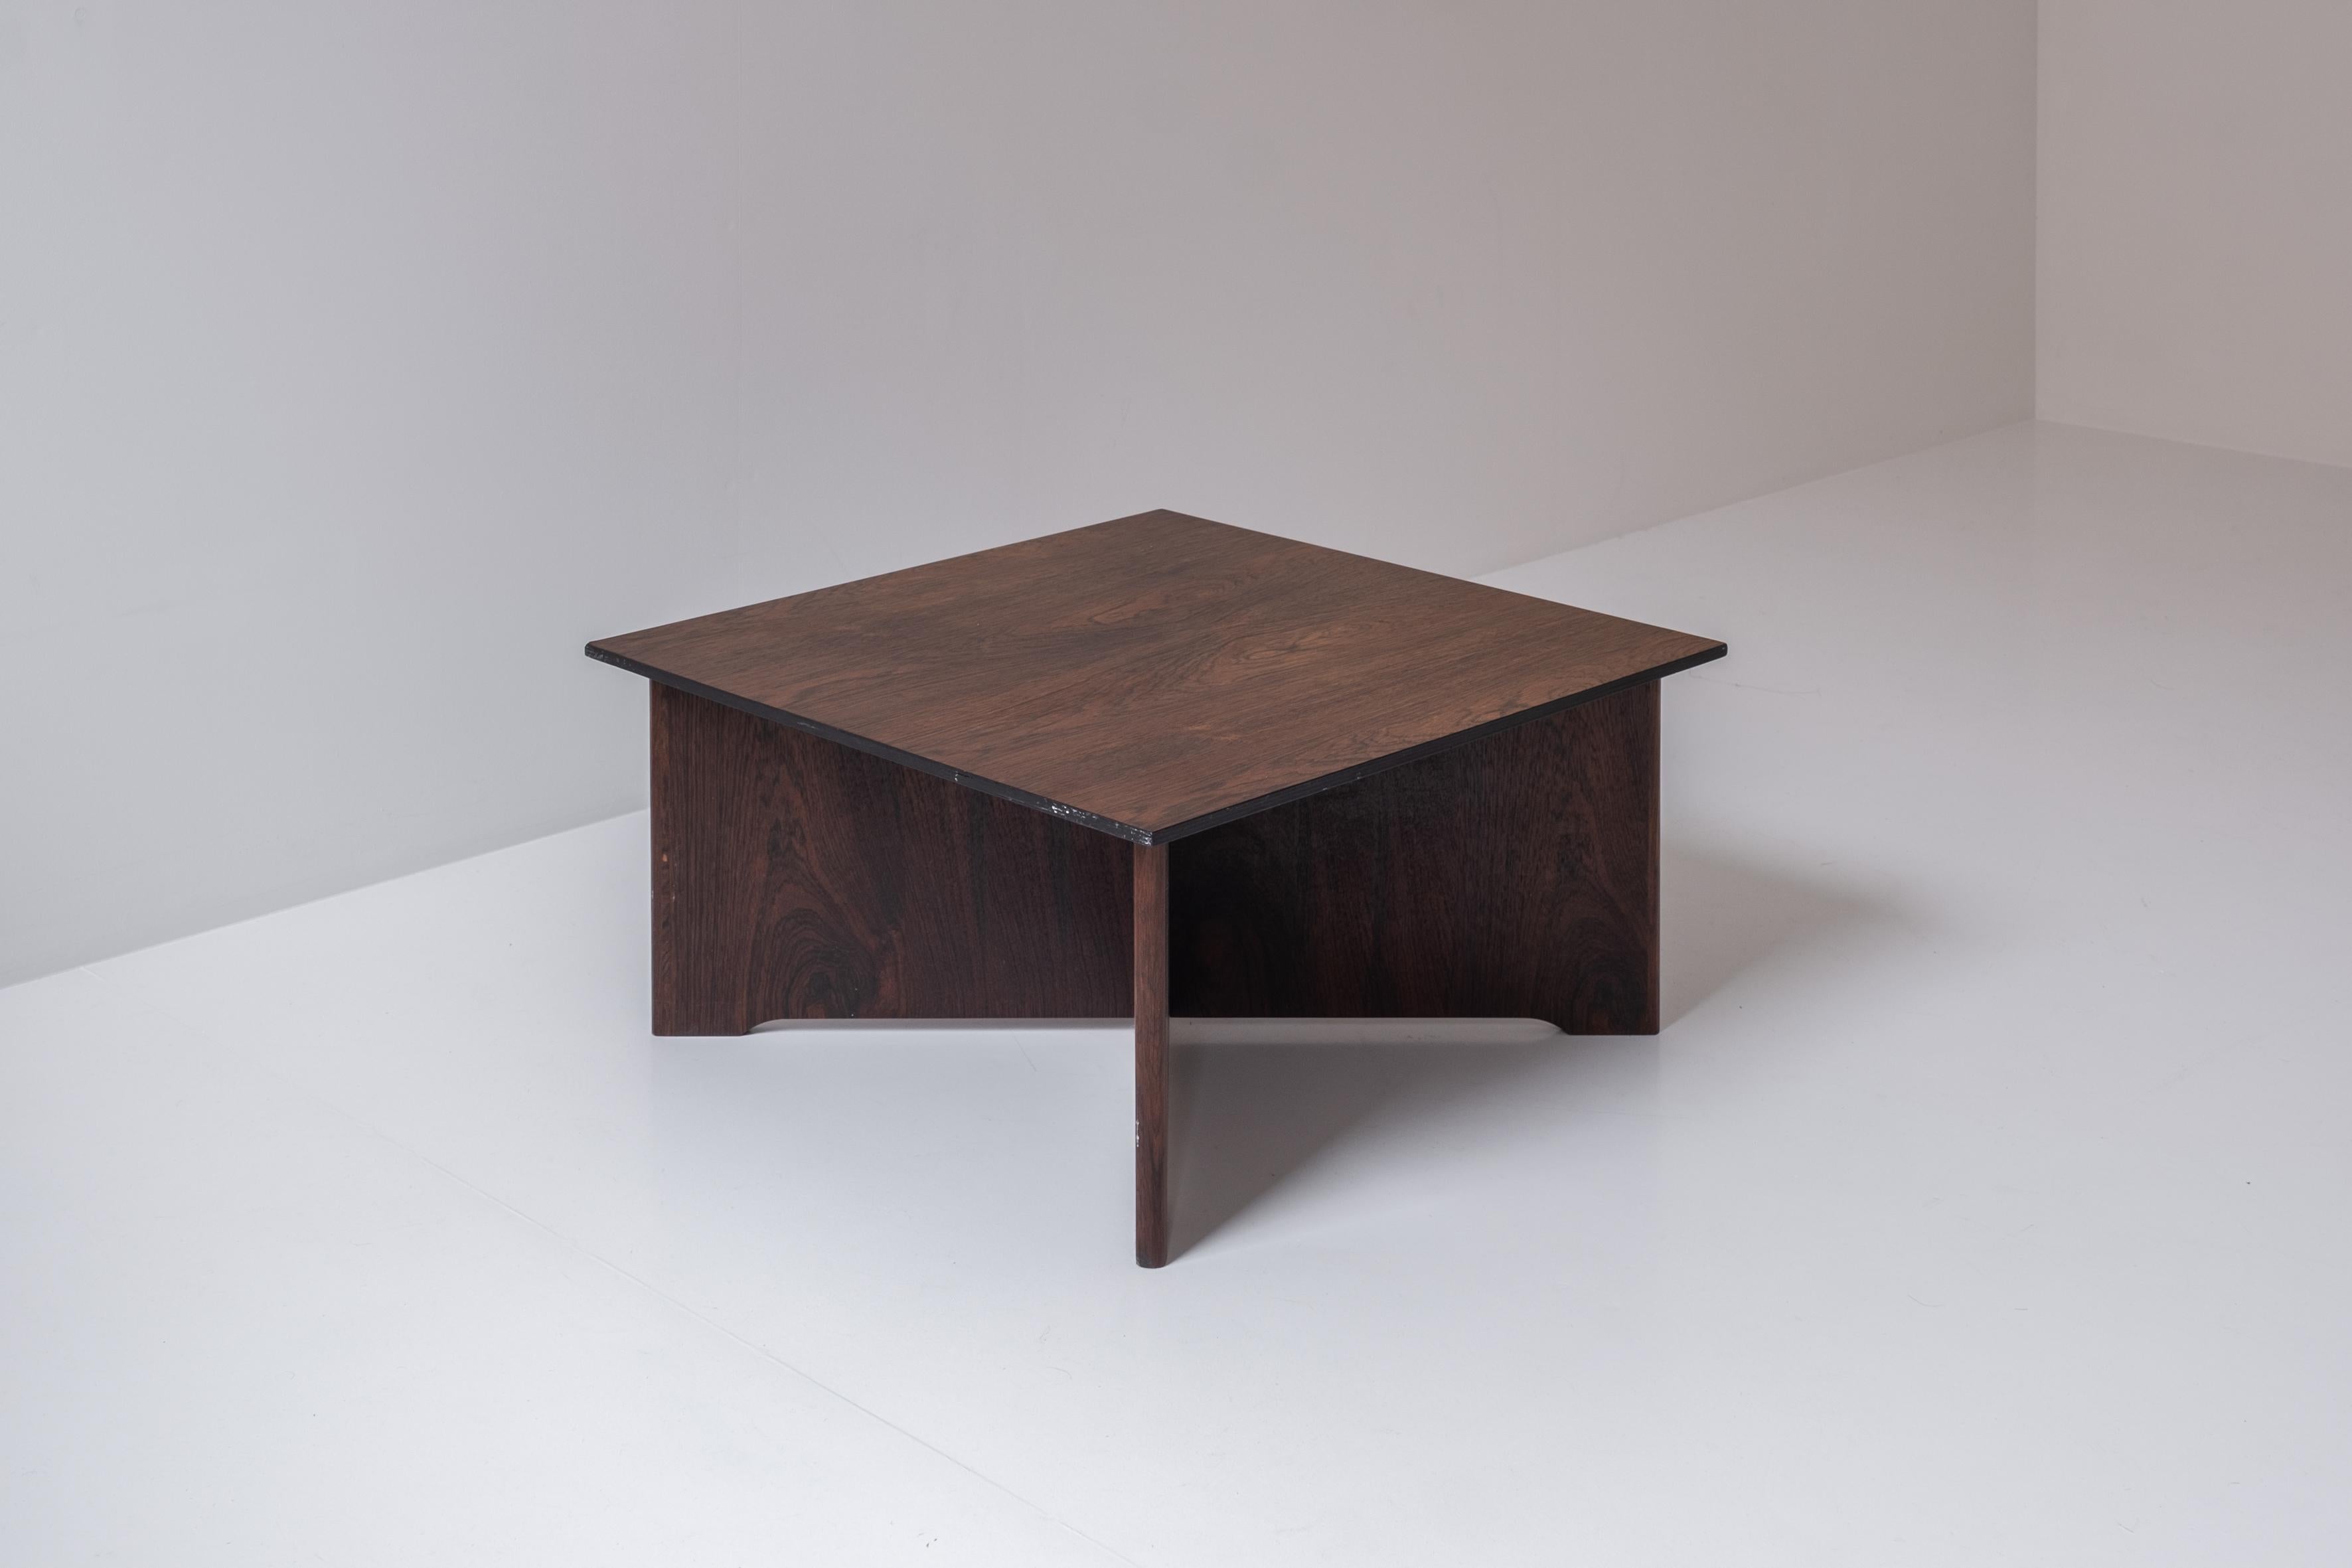 Rosewood Square Coffee Table from Denmark, Designed in the 1960s